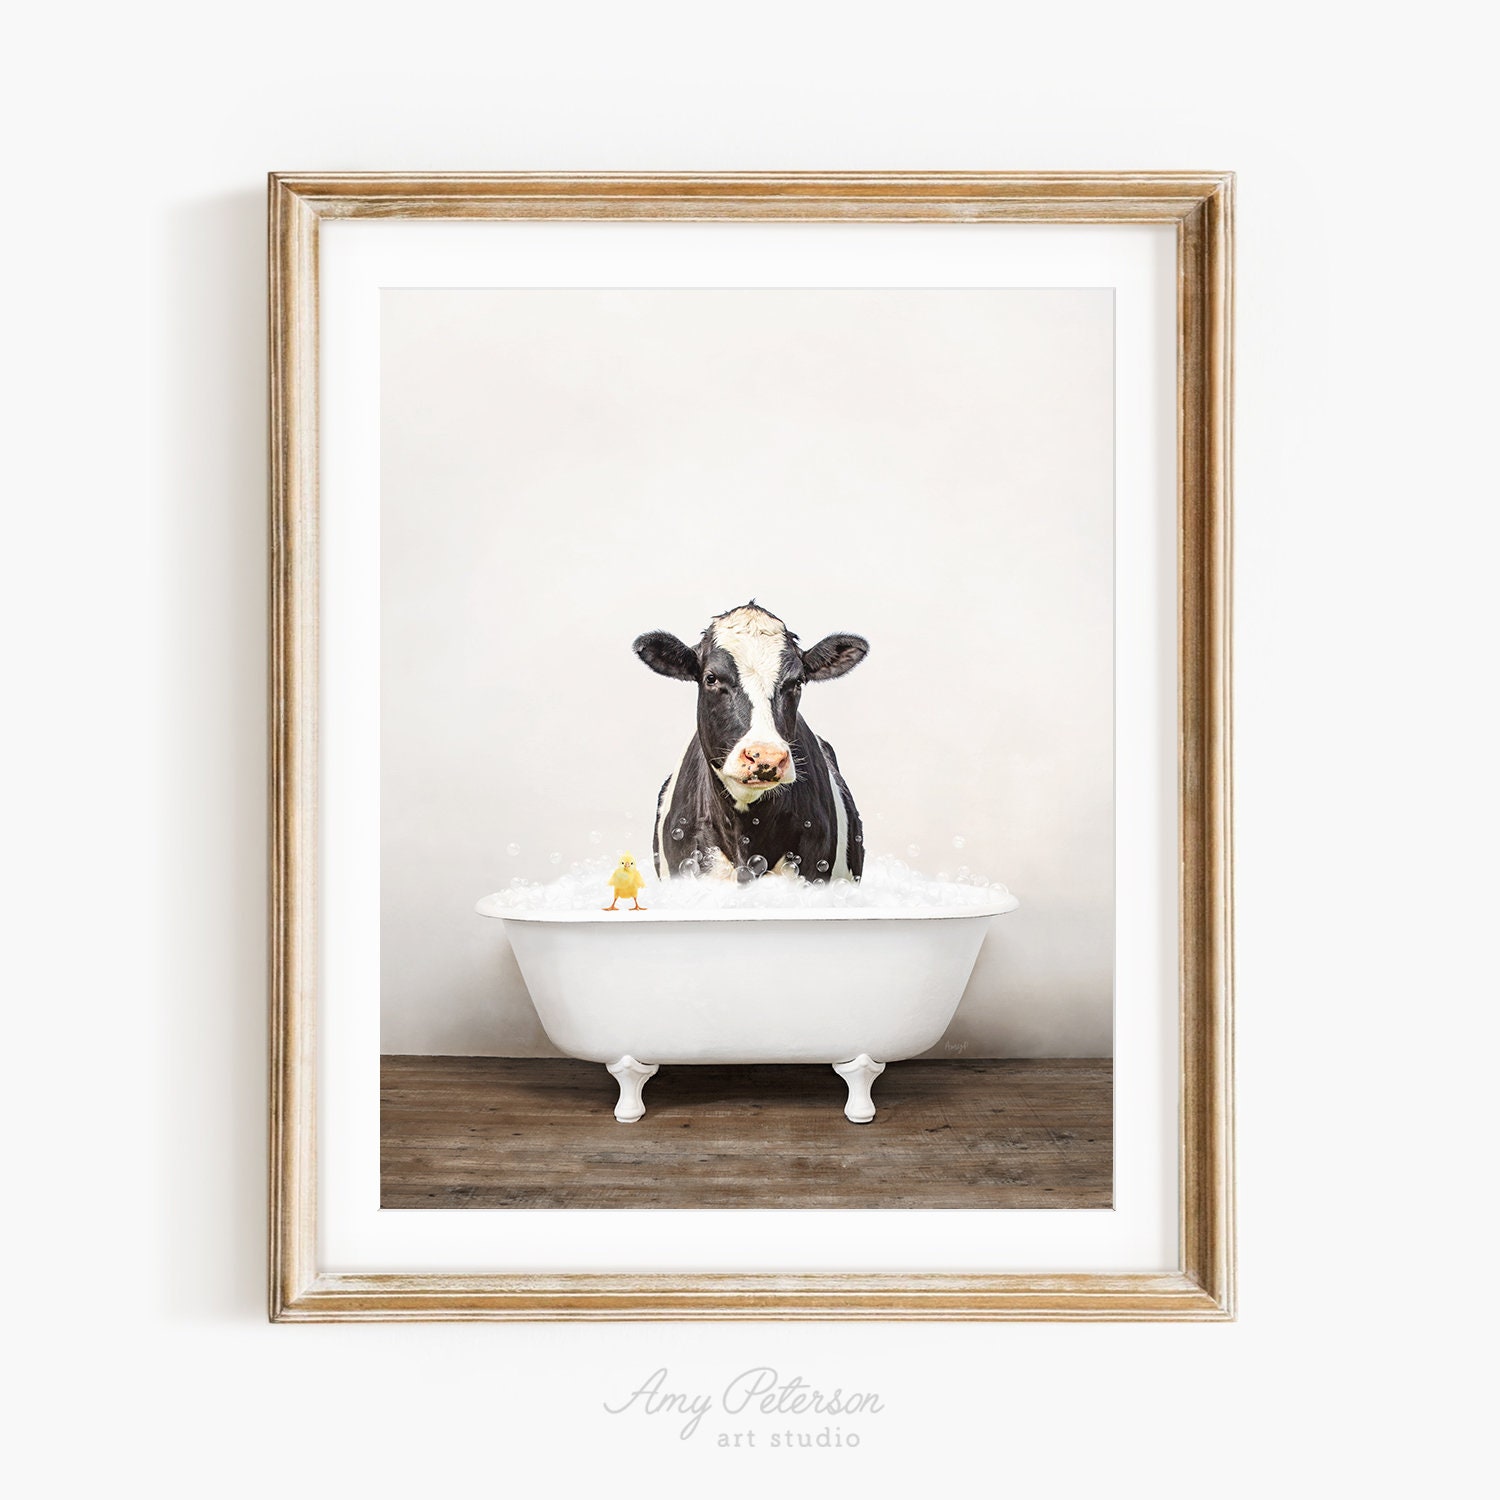 Cow and Baby Chick in a Vintage Bathtub Rustic Bath Style image